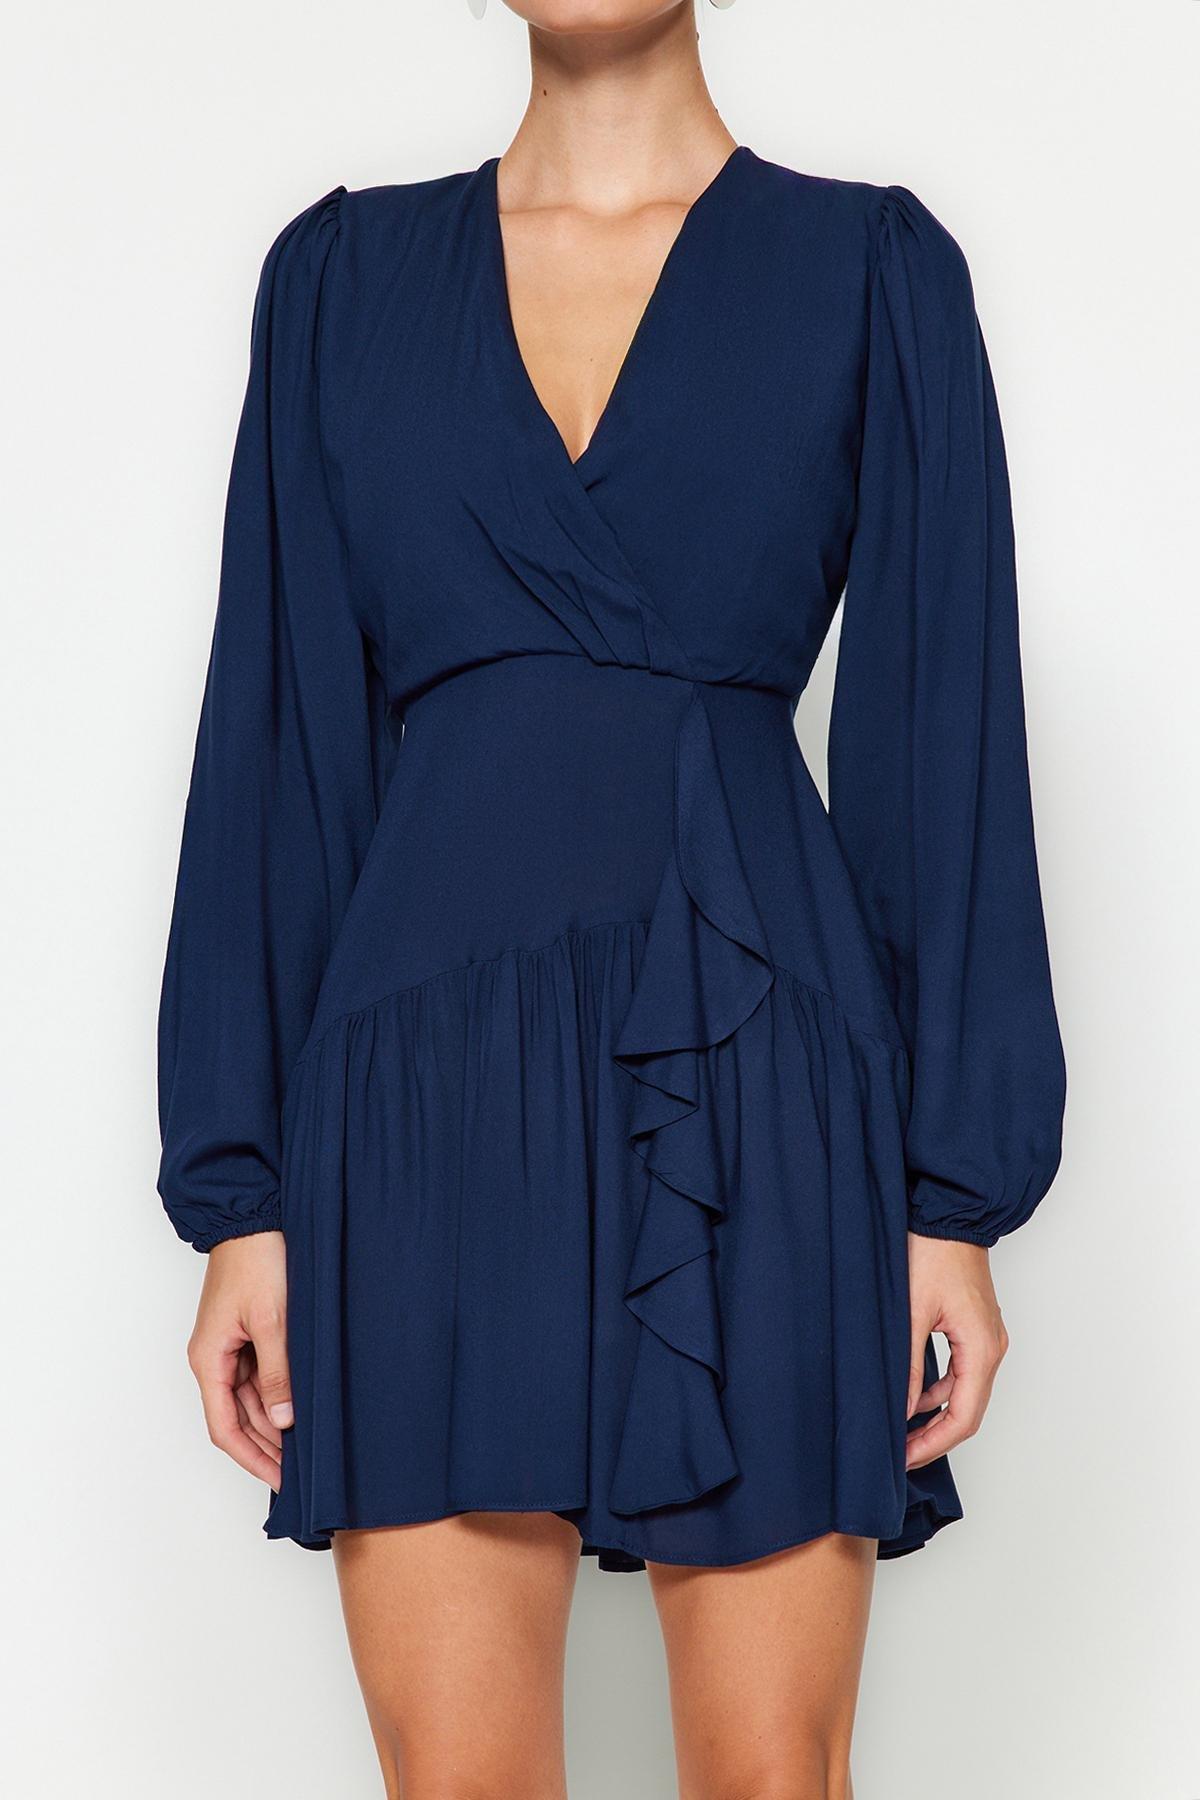 Trendyol - Navy Knitted Double Breasted Collar Dress